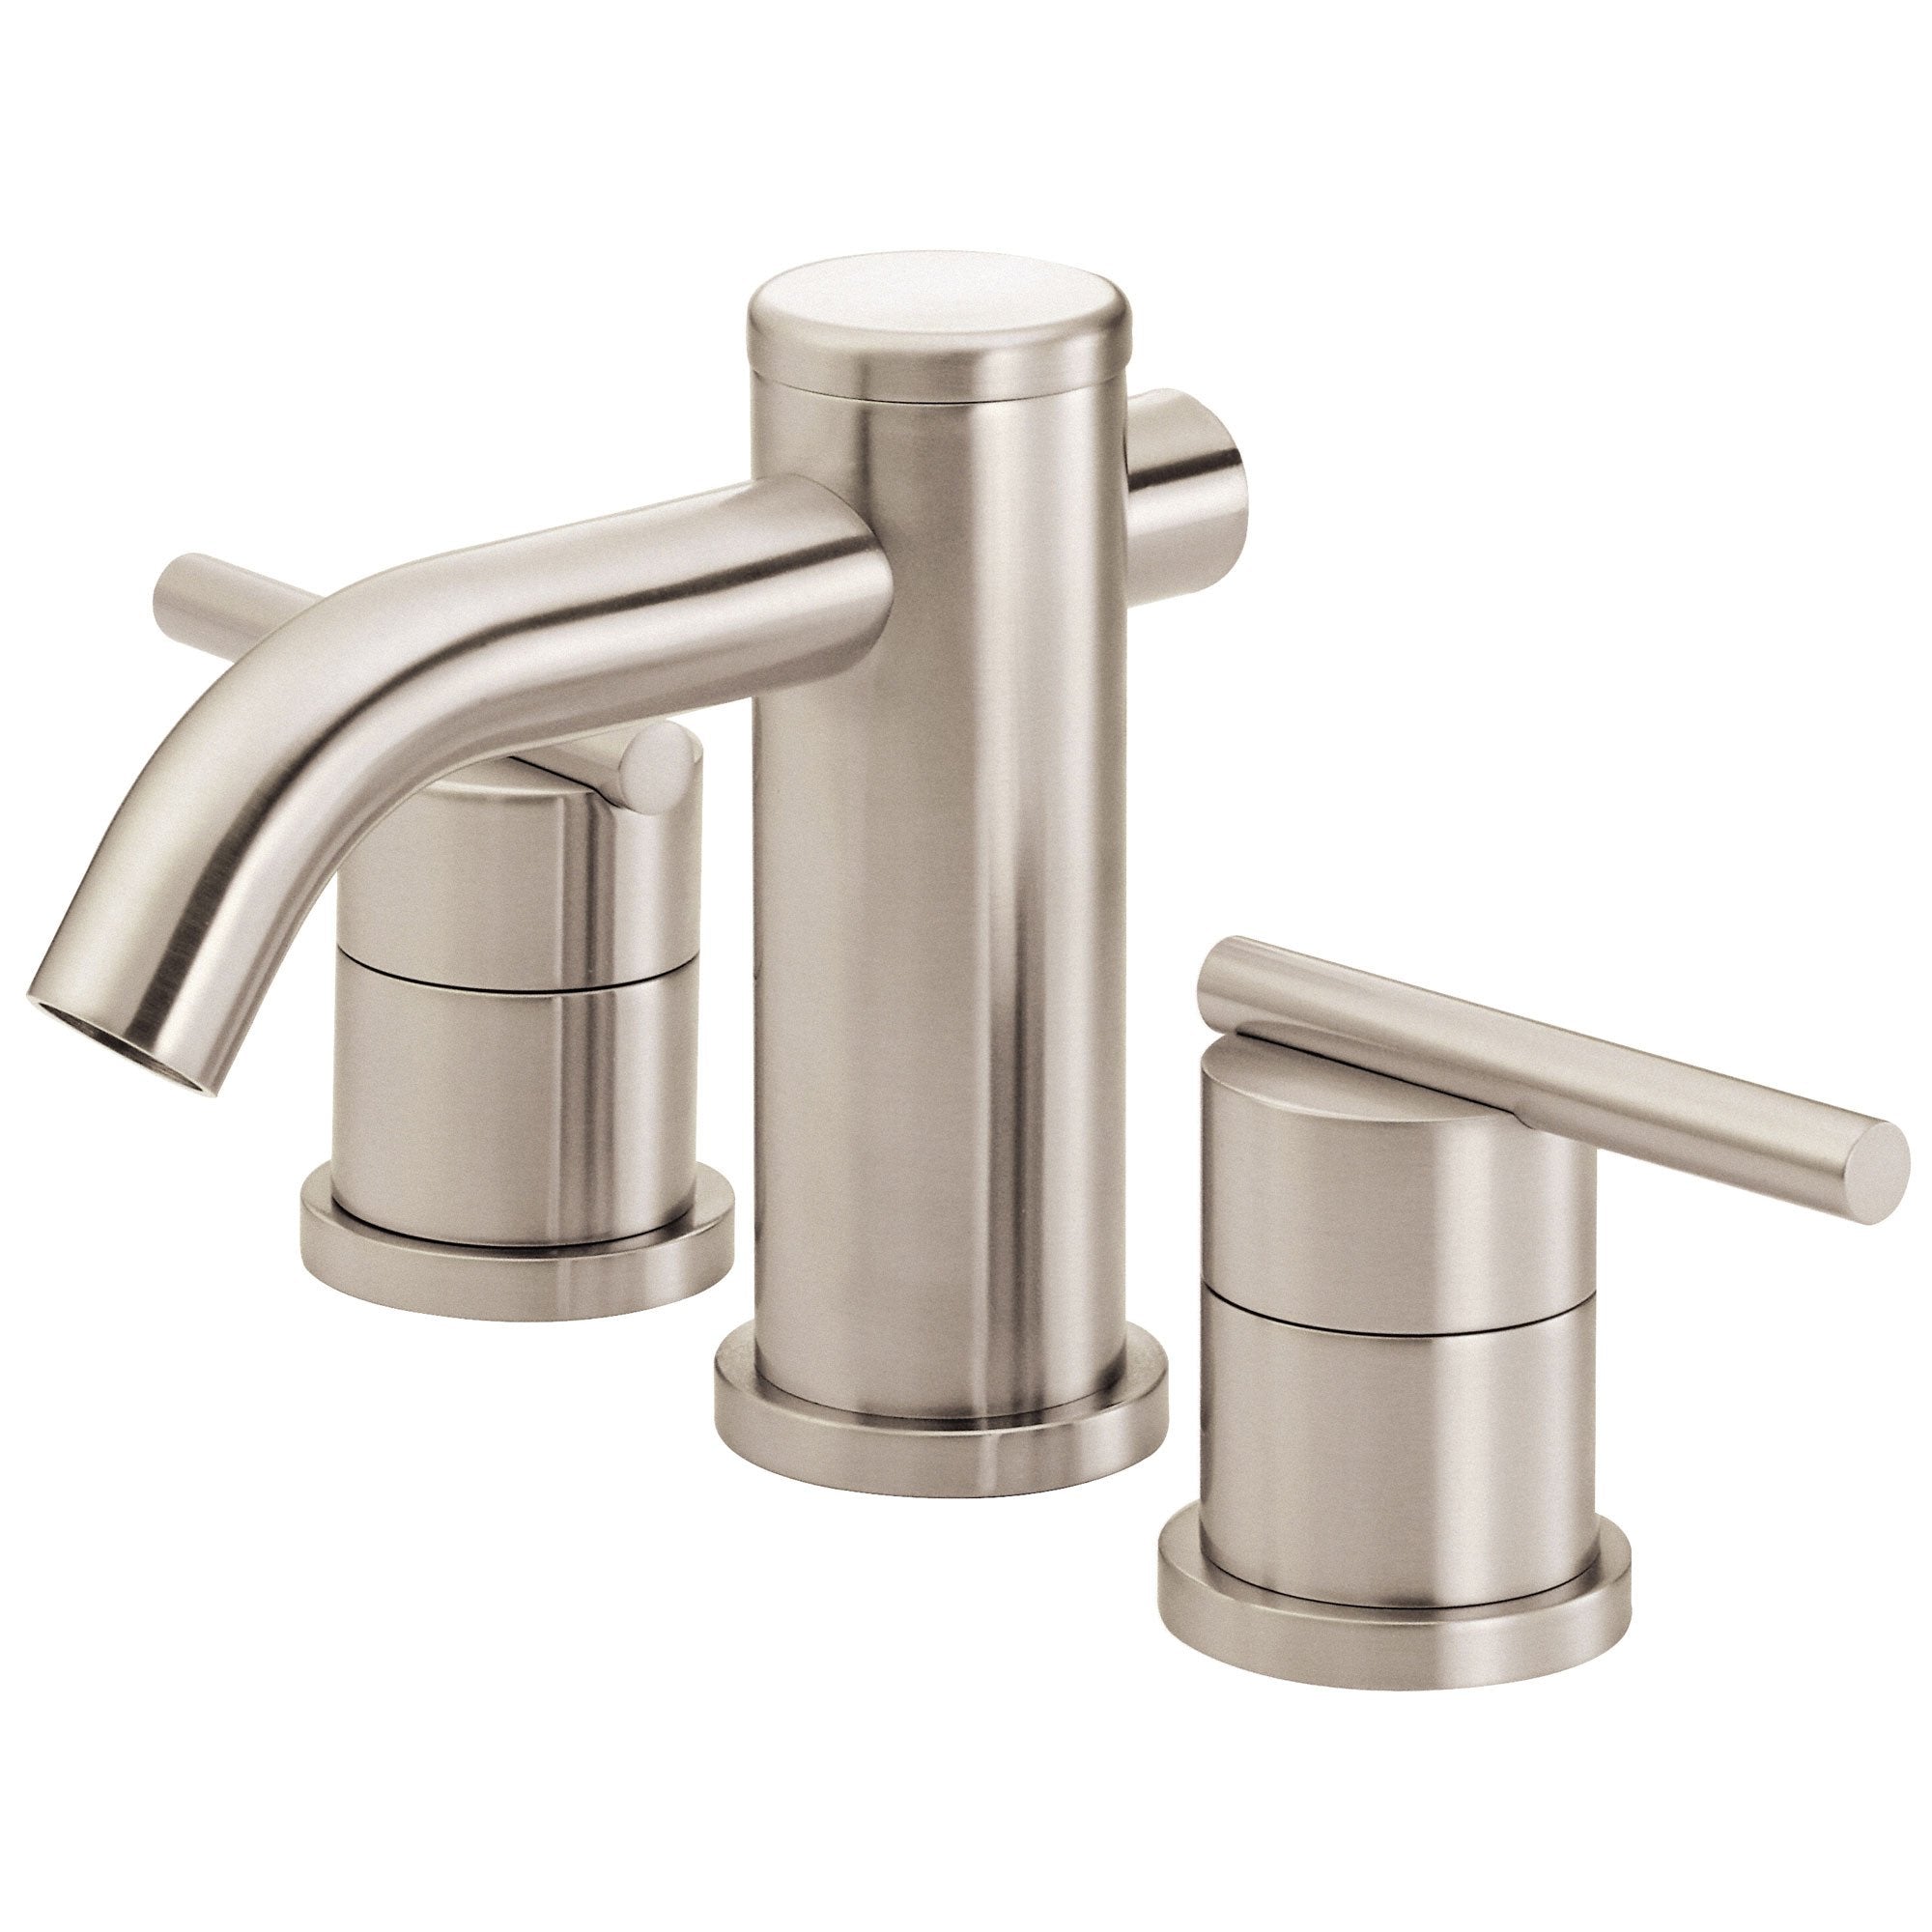 Danze Parma Brushed Nickel Cylindrical Spout Widespread Bathroom Sink Faucet